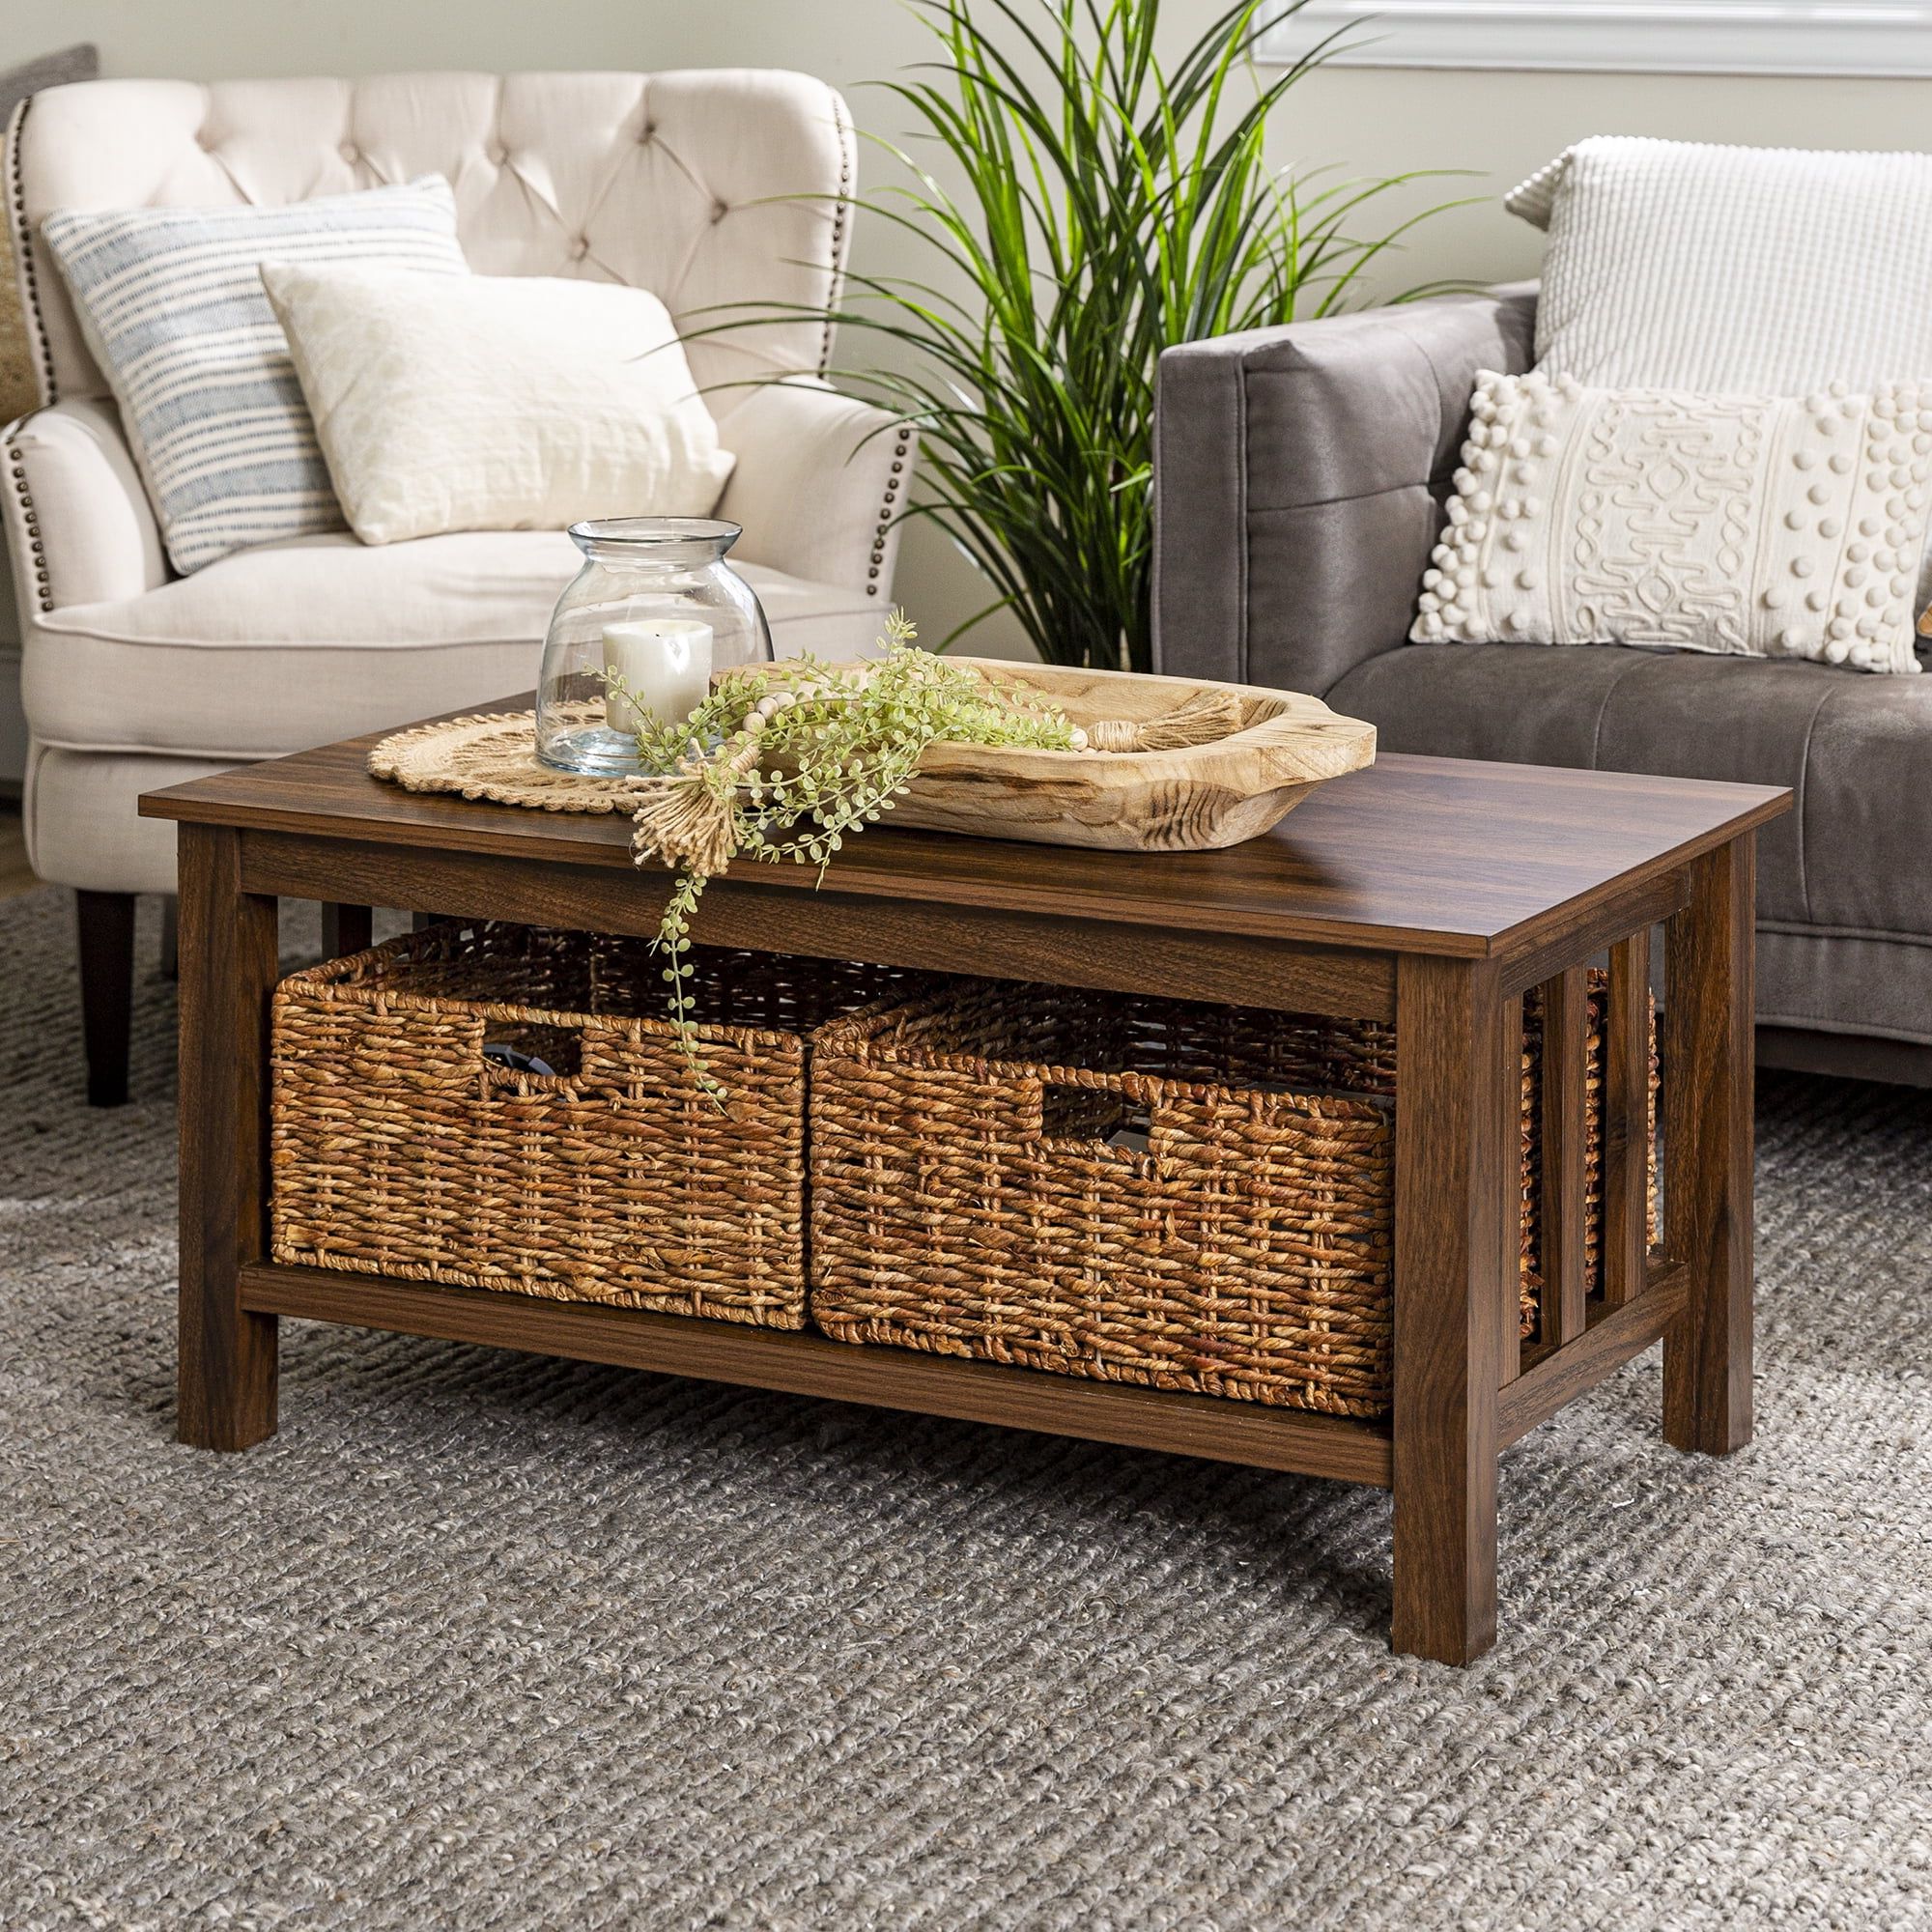 Woven Paths Traditional Storage Coffee Table With Bins, Dark Walnut Intended For Woven Paths Coffee Tables (View 2 of 20)